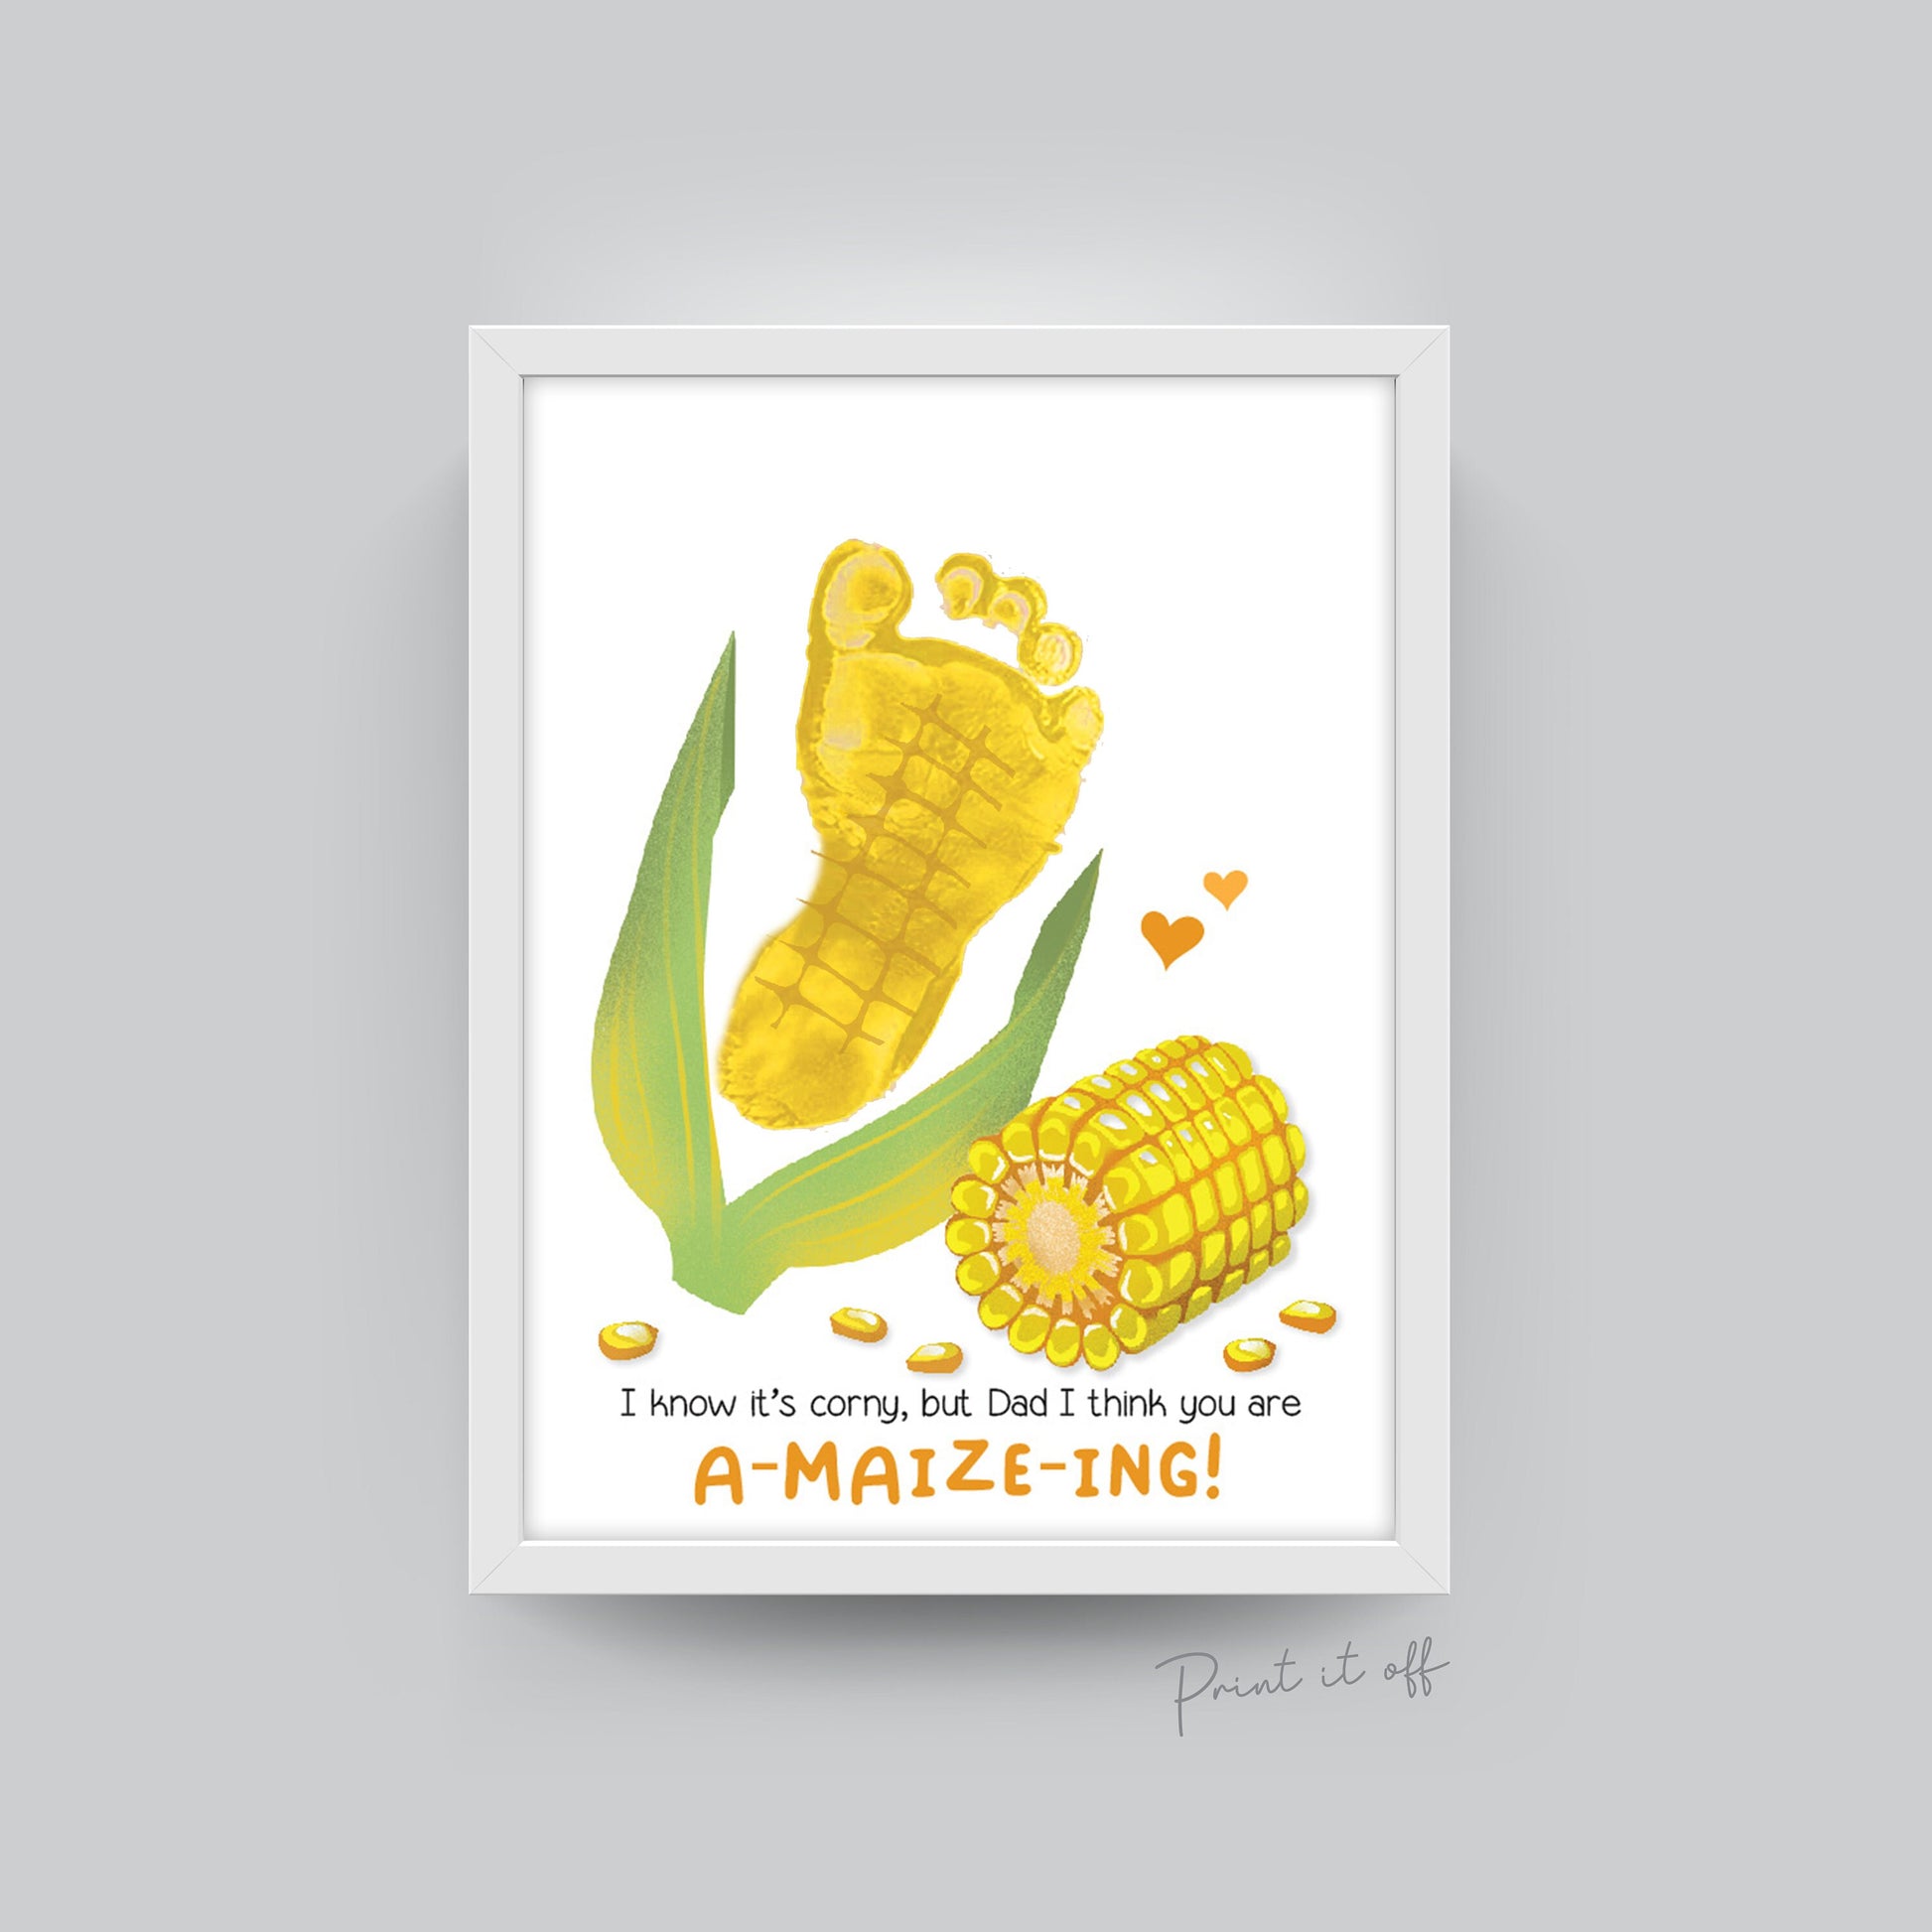 Corn A-maize-ing Dad / Footprint Art Craft / Dad Father's Day Birthday / Kids Baby Toddler / Keepsake Gift Card Sign / PRINT IT OFF 0503